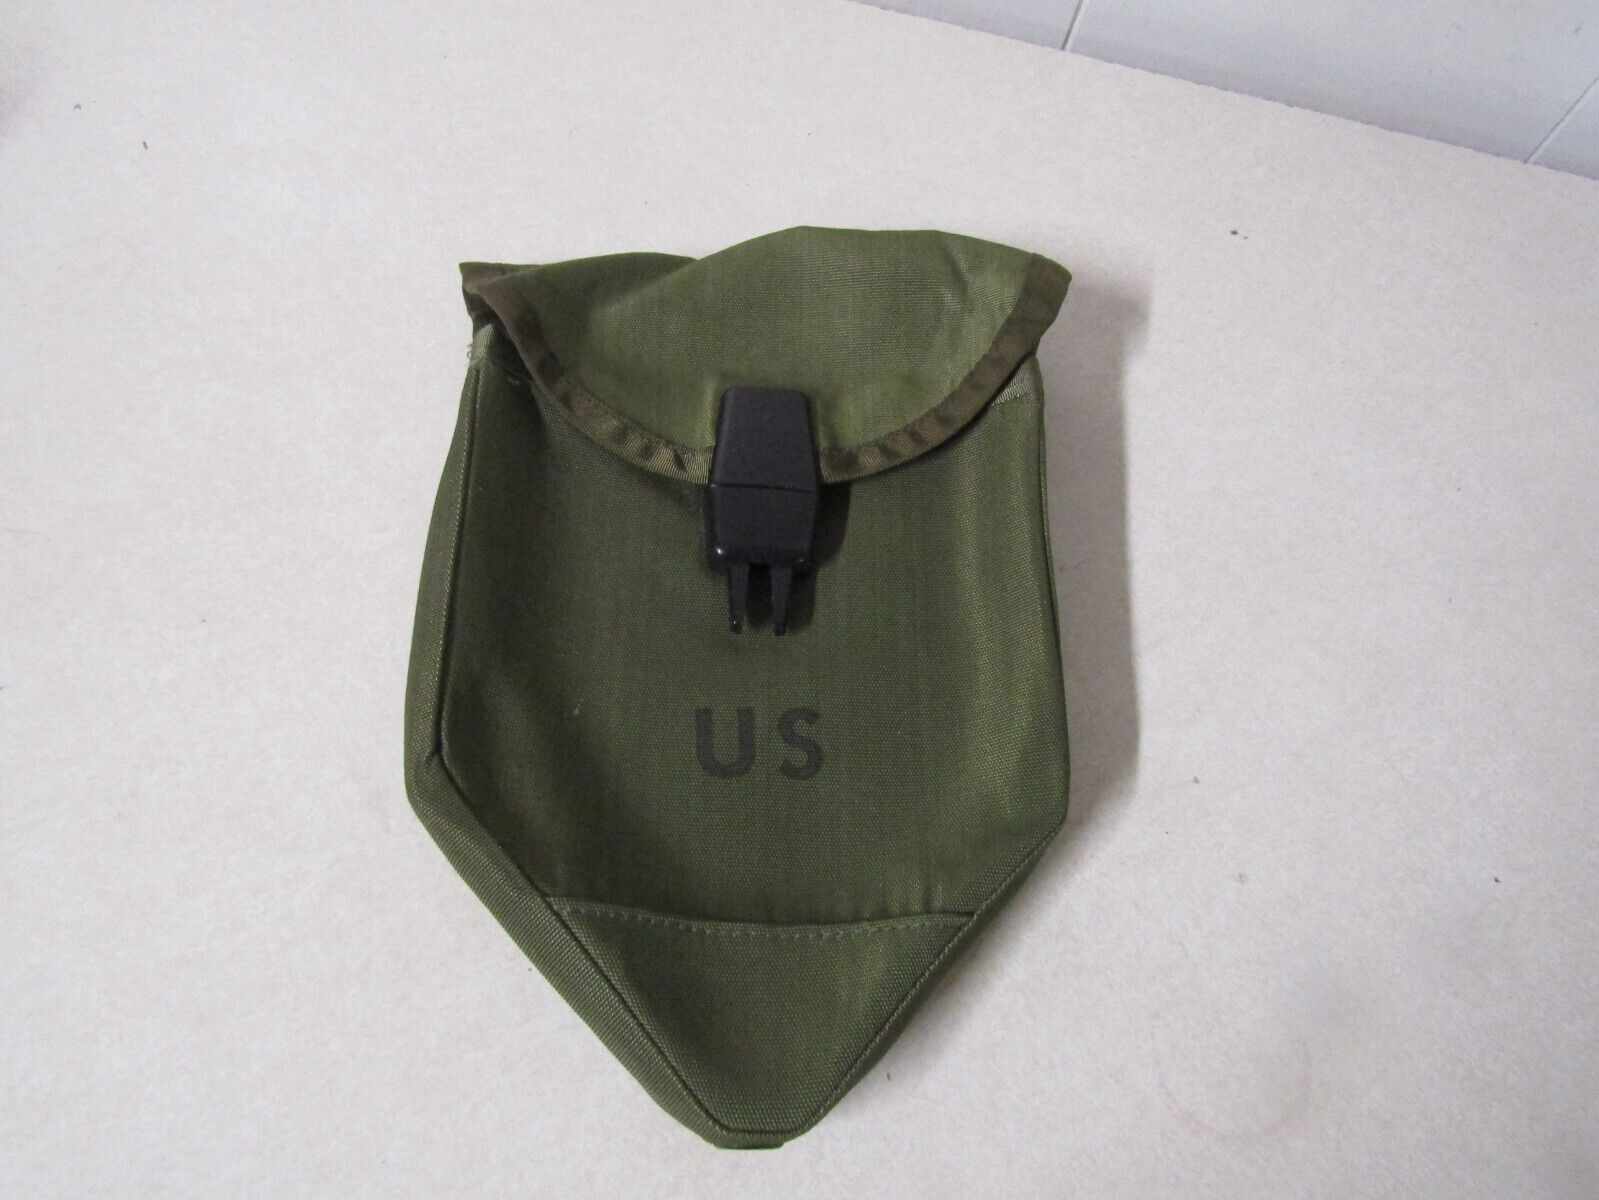 GENUINE US MILITARY ISSUE ENTRENCHING TOOL CARRIER WITH CLIPS OD GREEN